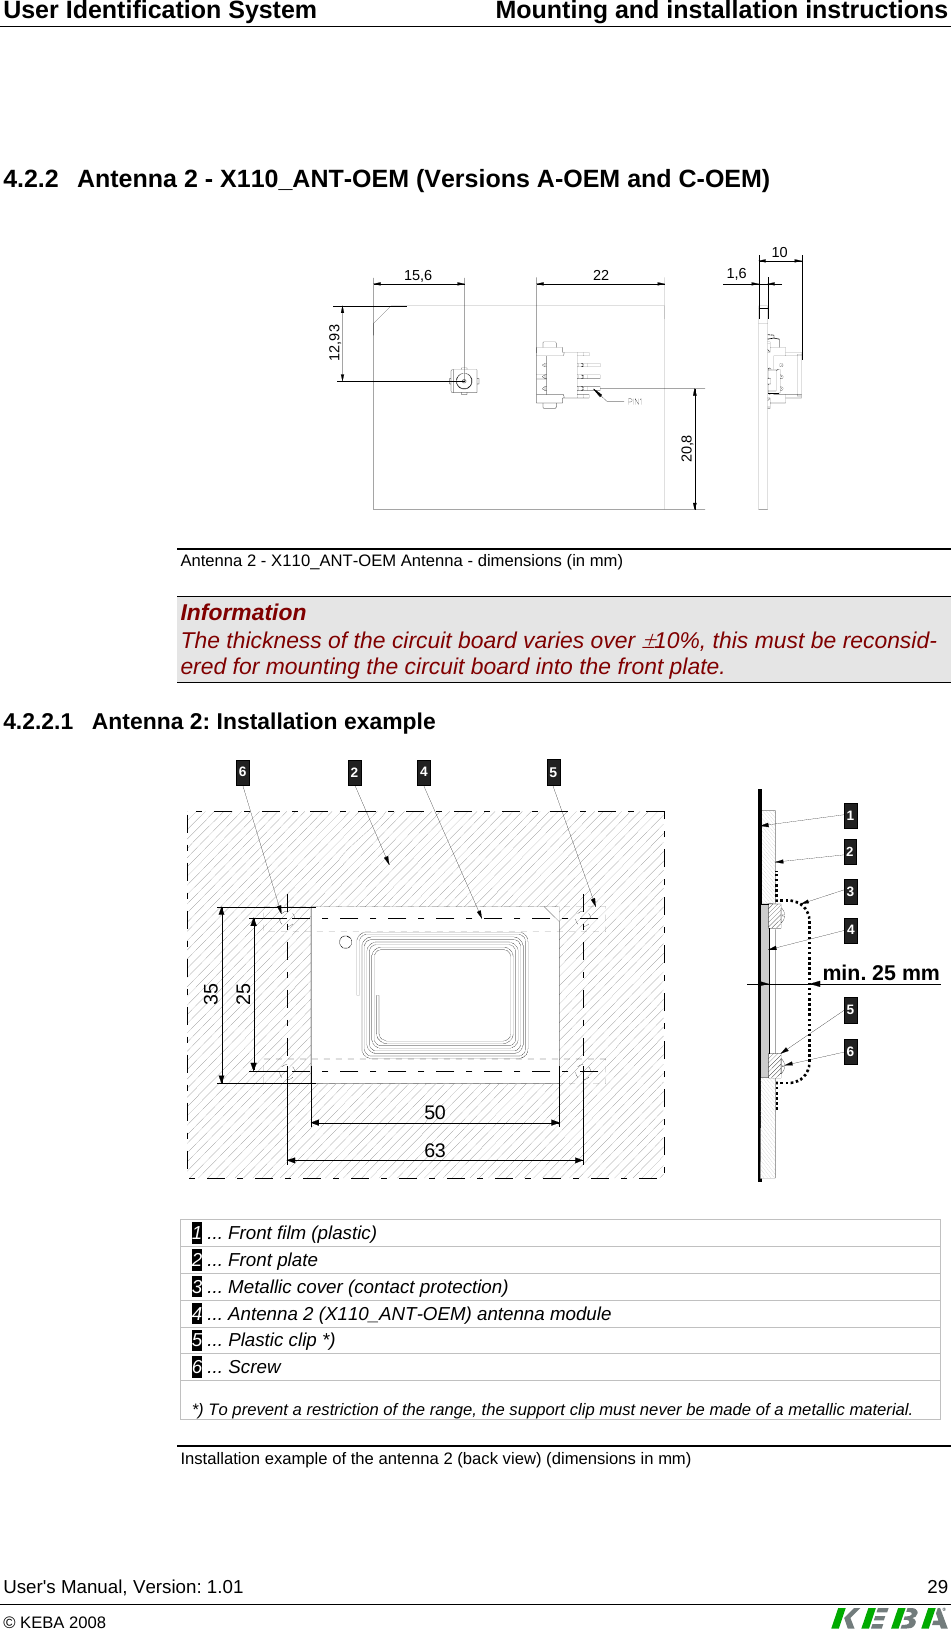 User Identification System  Mounting and installation instructions User&apos;s Manual, Version: 1.01  29 © KEBA 2008   4.2.2  Antenna 2 - X110_ANT-OEM (Versions A-OEM and C-OEM)  12,932215,620,81,610 Antenna 2 - X110_ANT-OEM Antenna - dimensions (in mm) Information The thickness of the circuit board varies over ±10%, this must be reconsid-ered for mounting the circuit board into the front plate. 4.2.2.1  Antenna 2: Installation example 123456min. 25 mm245663255035  1 ... Front film (plastic) 2 ... Front plate 3 ... Metallic cover (contact protection) 4 ... Antenna 2 (X110_ANT-OEM) antenna module 5 ... Plastic clip *) 6 ... Screw  *) To prevent a restriction of the range, the support clip must never be made of a metallic material.  Installation example of the antenna 2 (back view) (dimensions in mm) 